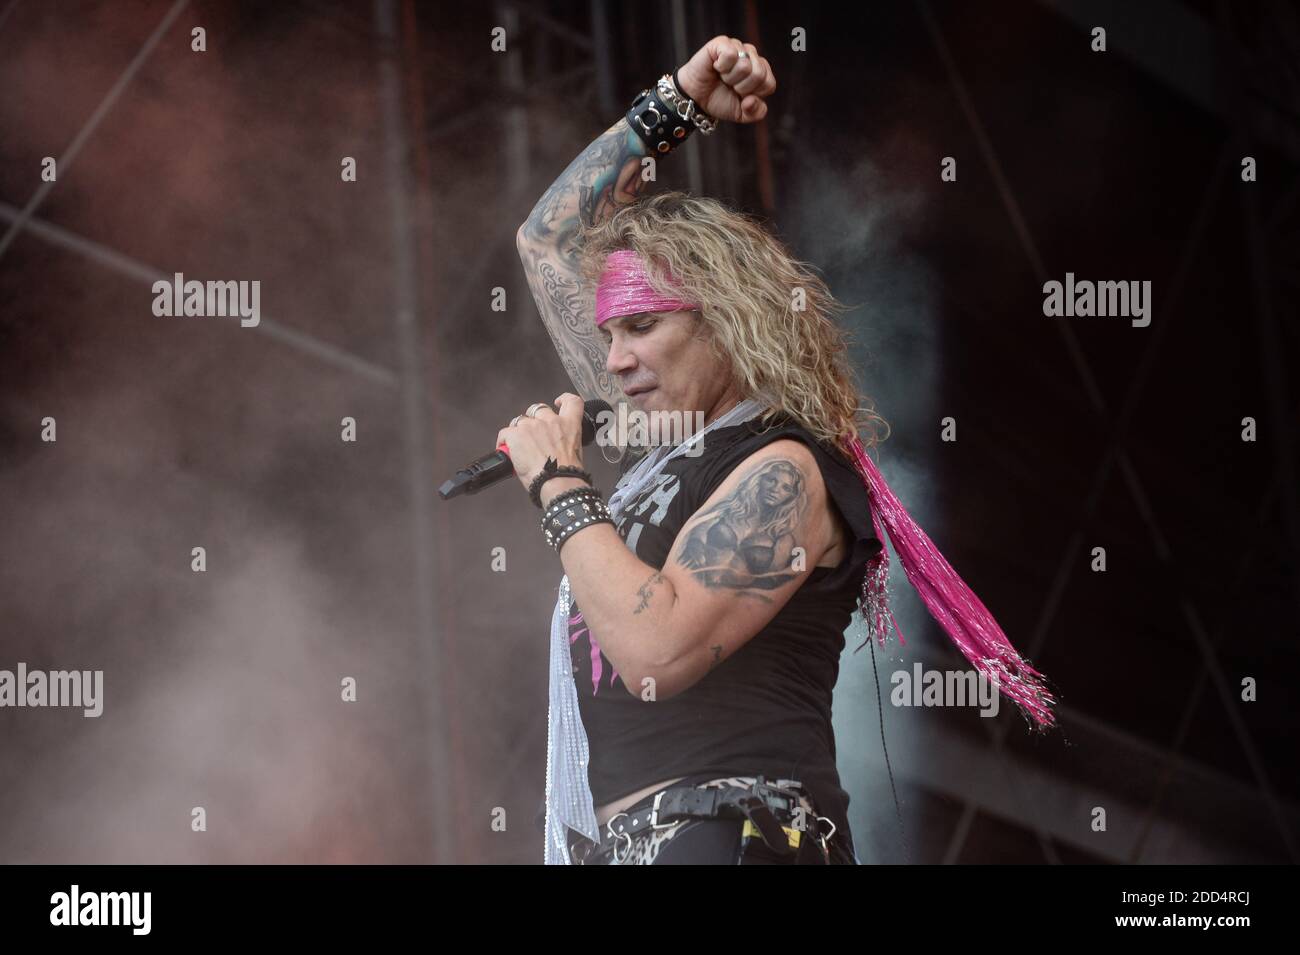 Steel Panther performing live on stage during Wacken Open Air Festival in Wacken, Germany on August 4, 2018. Photo by Julien Reynaud/APS-Medias/ABACAPRESS.COM Stock Photo